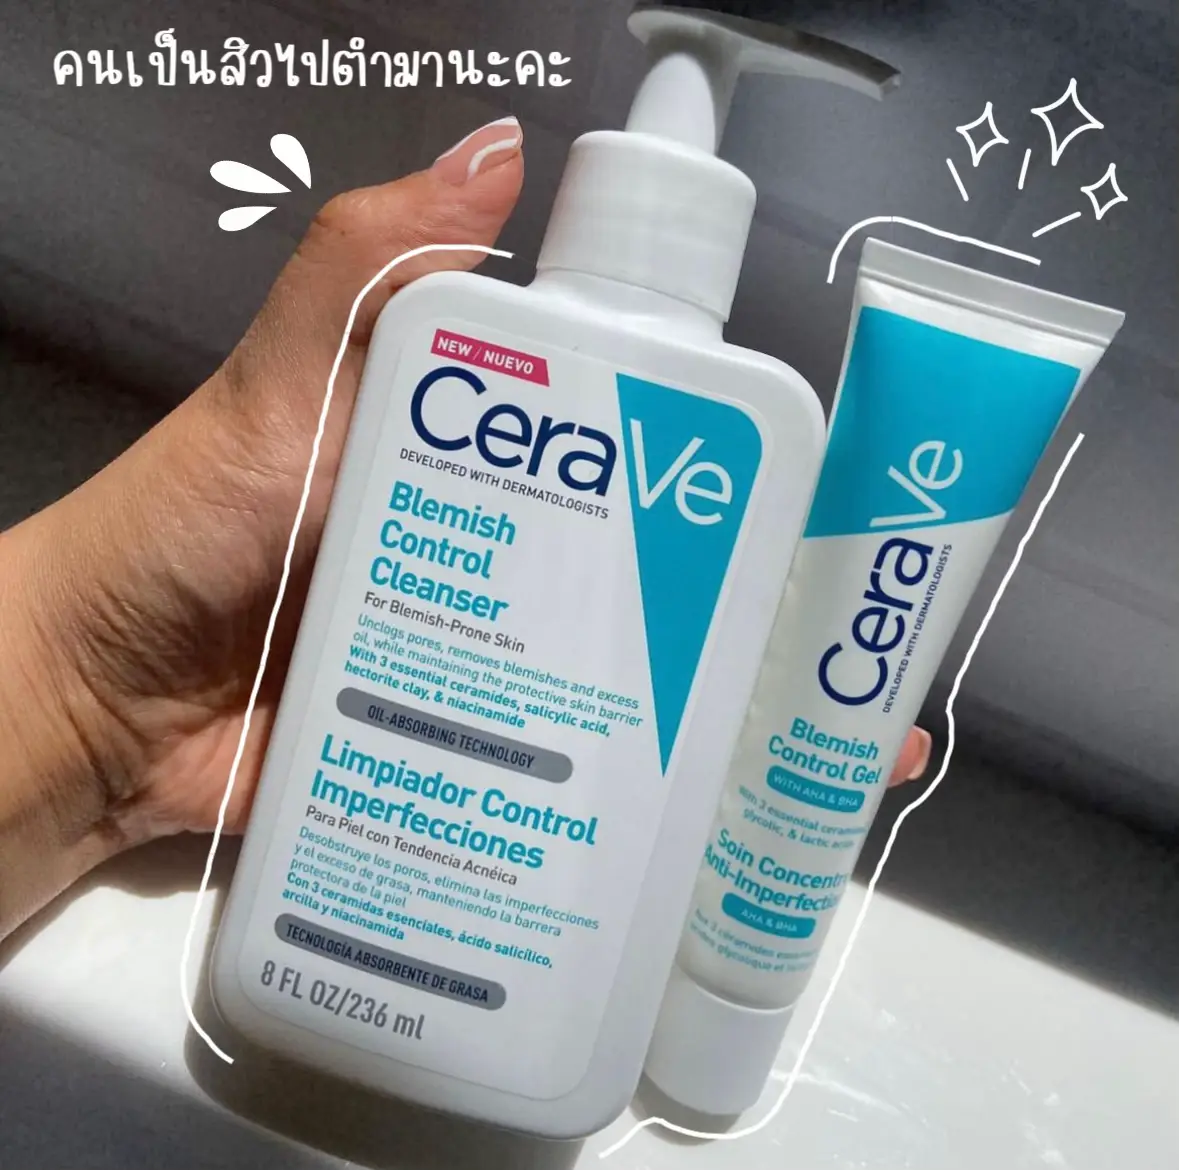 CERAVE BLEMISH CONTROL CLEANSER, Gallery posted by หมีมาแชร์